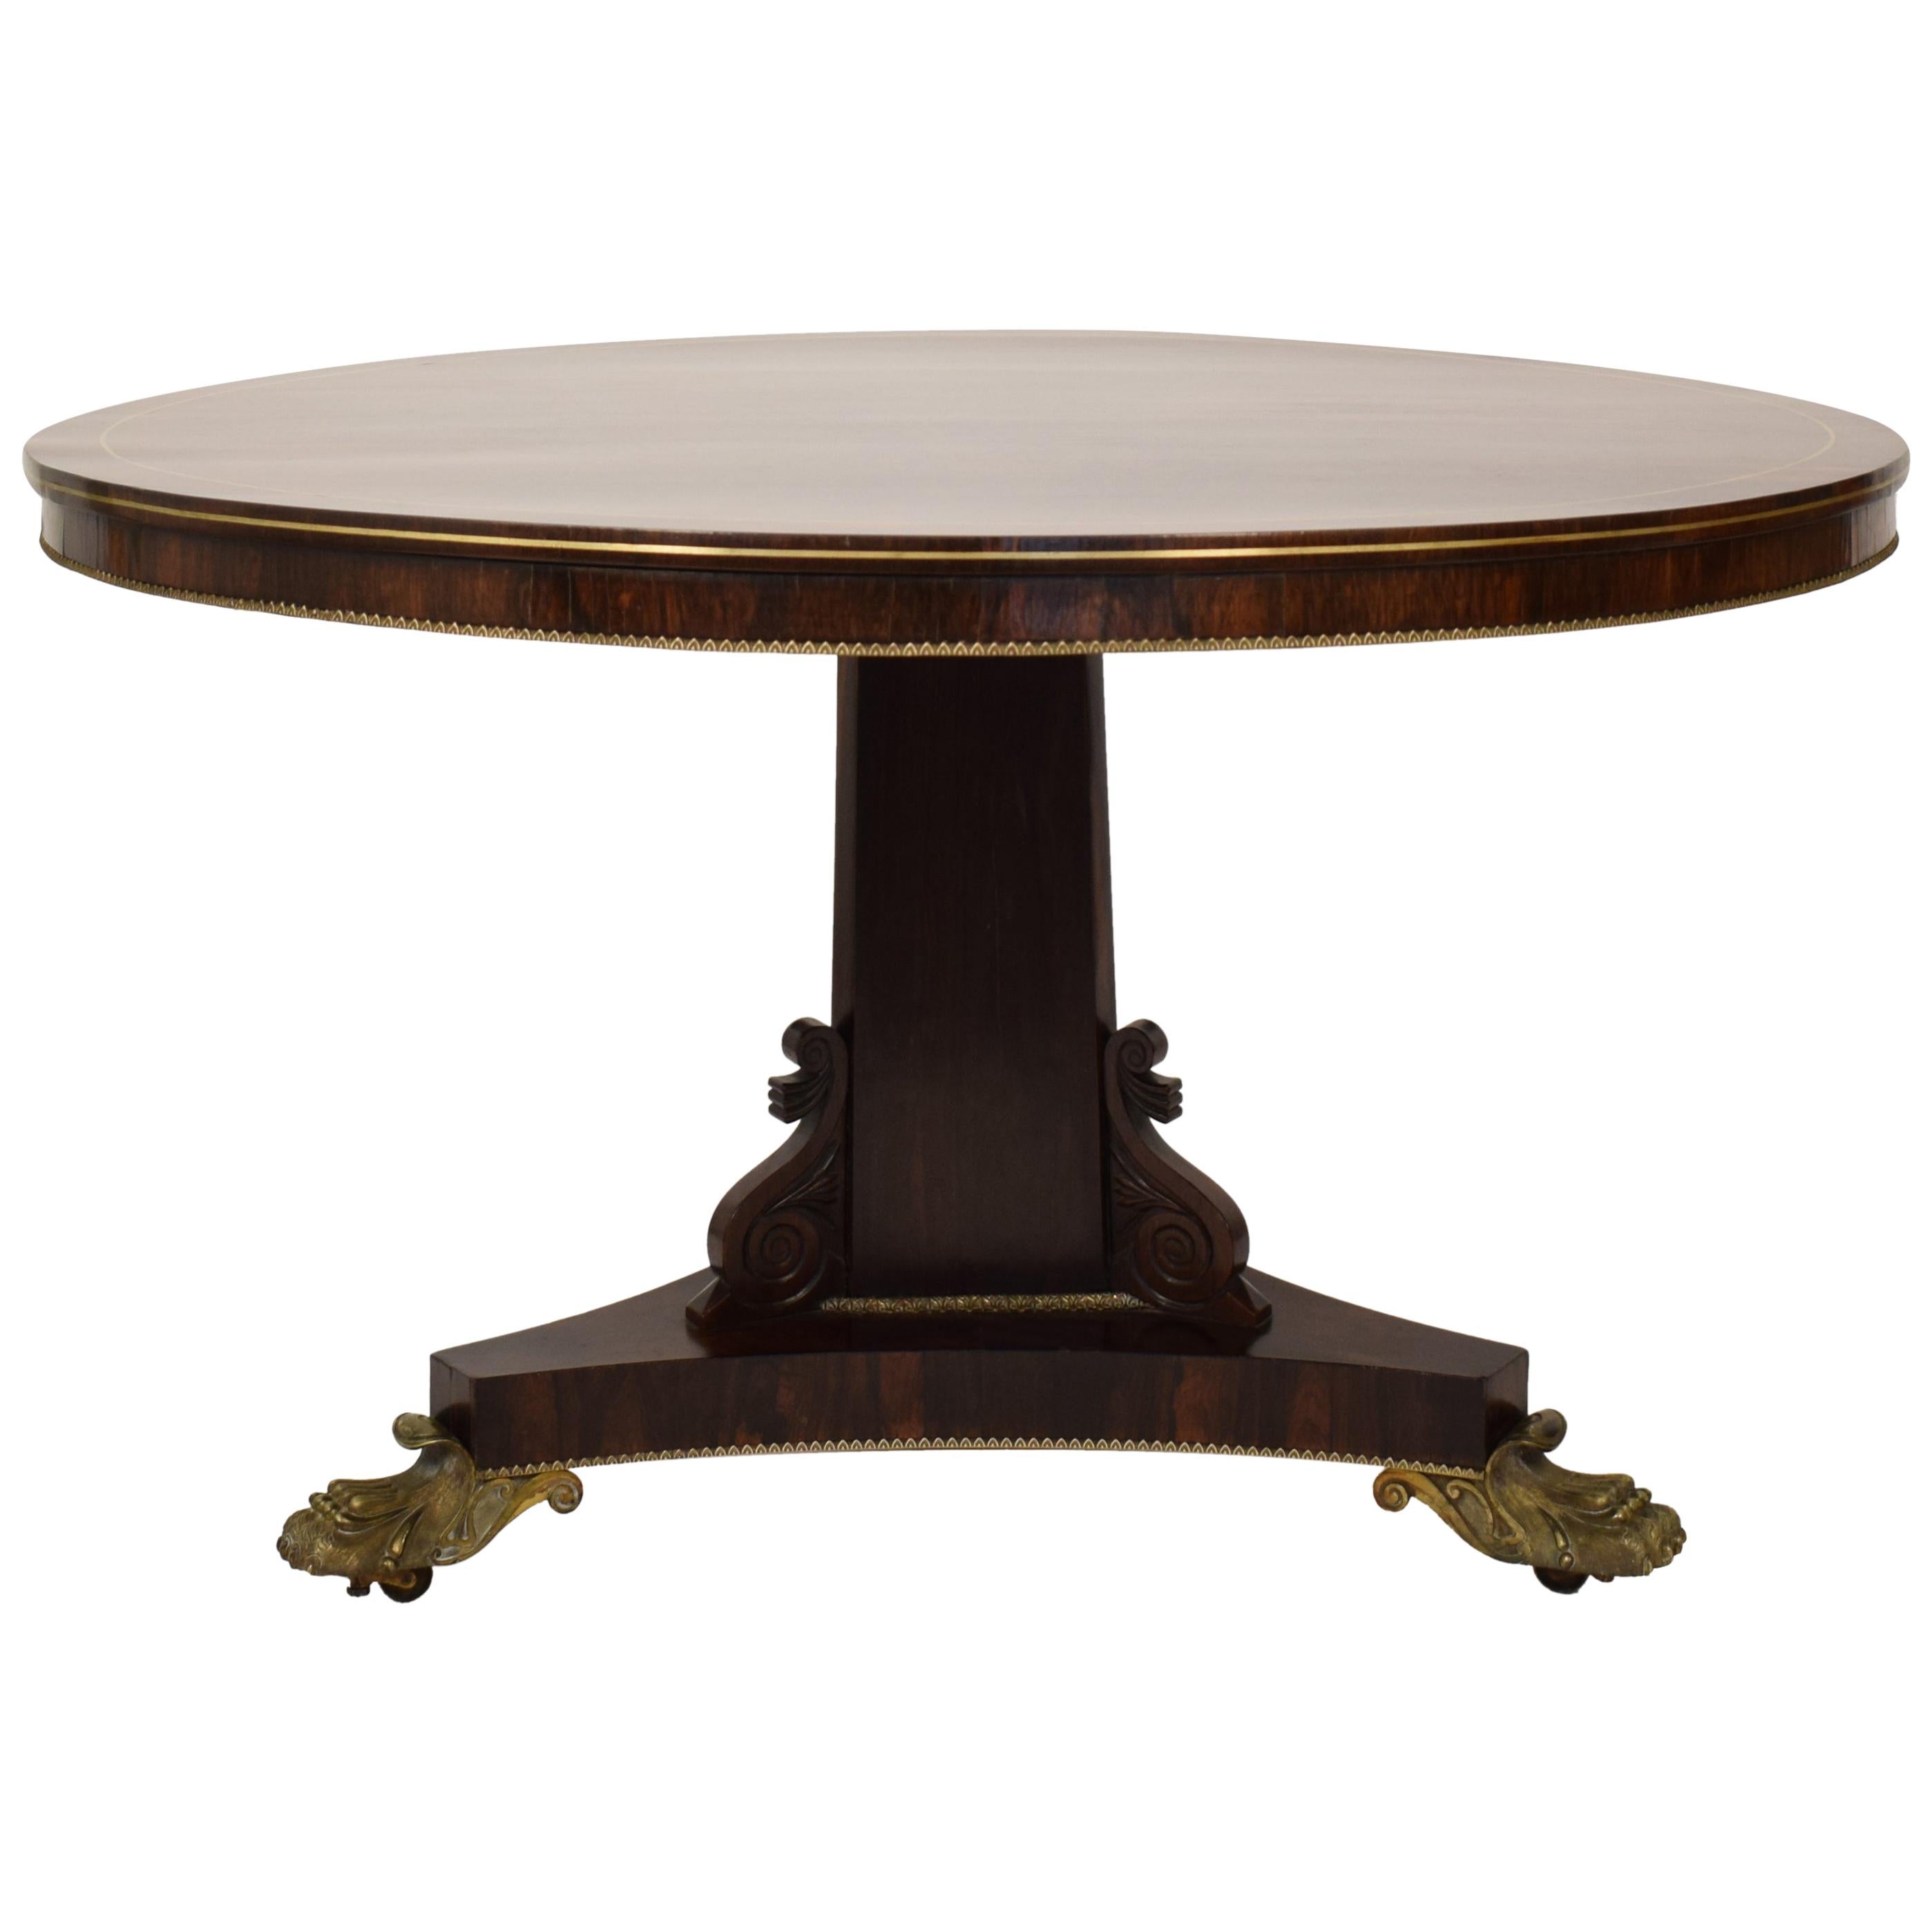 19th Century Brass Inlaid Rosewood Tilt Top Centre Table Attributed to Gillows